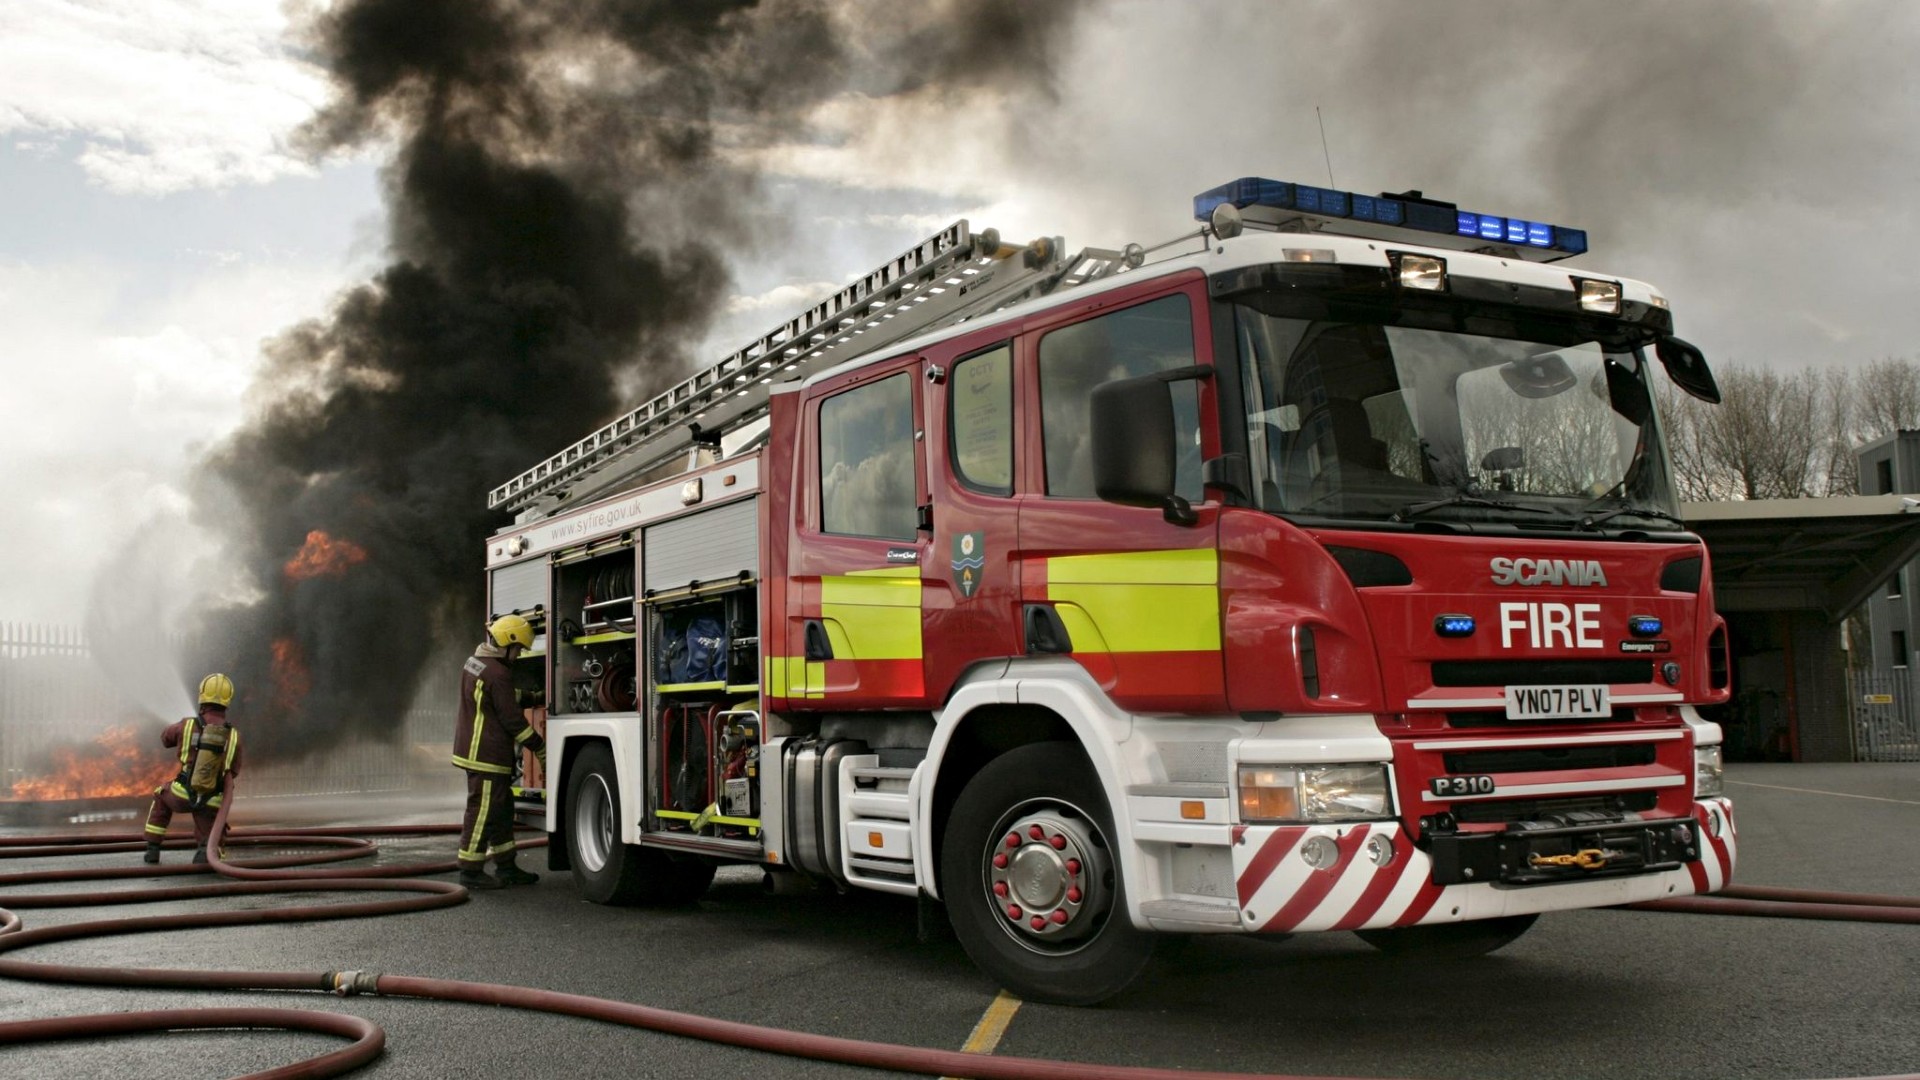 1920x1080 Fire and Scania Fire Truck: